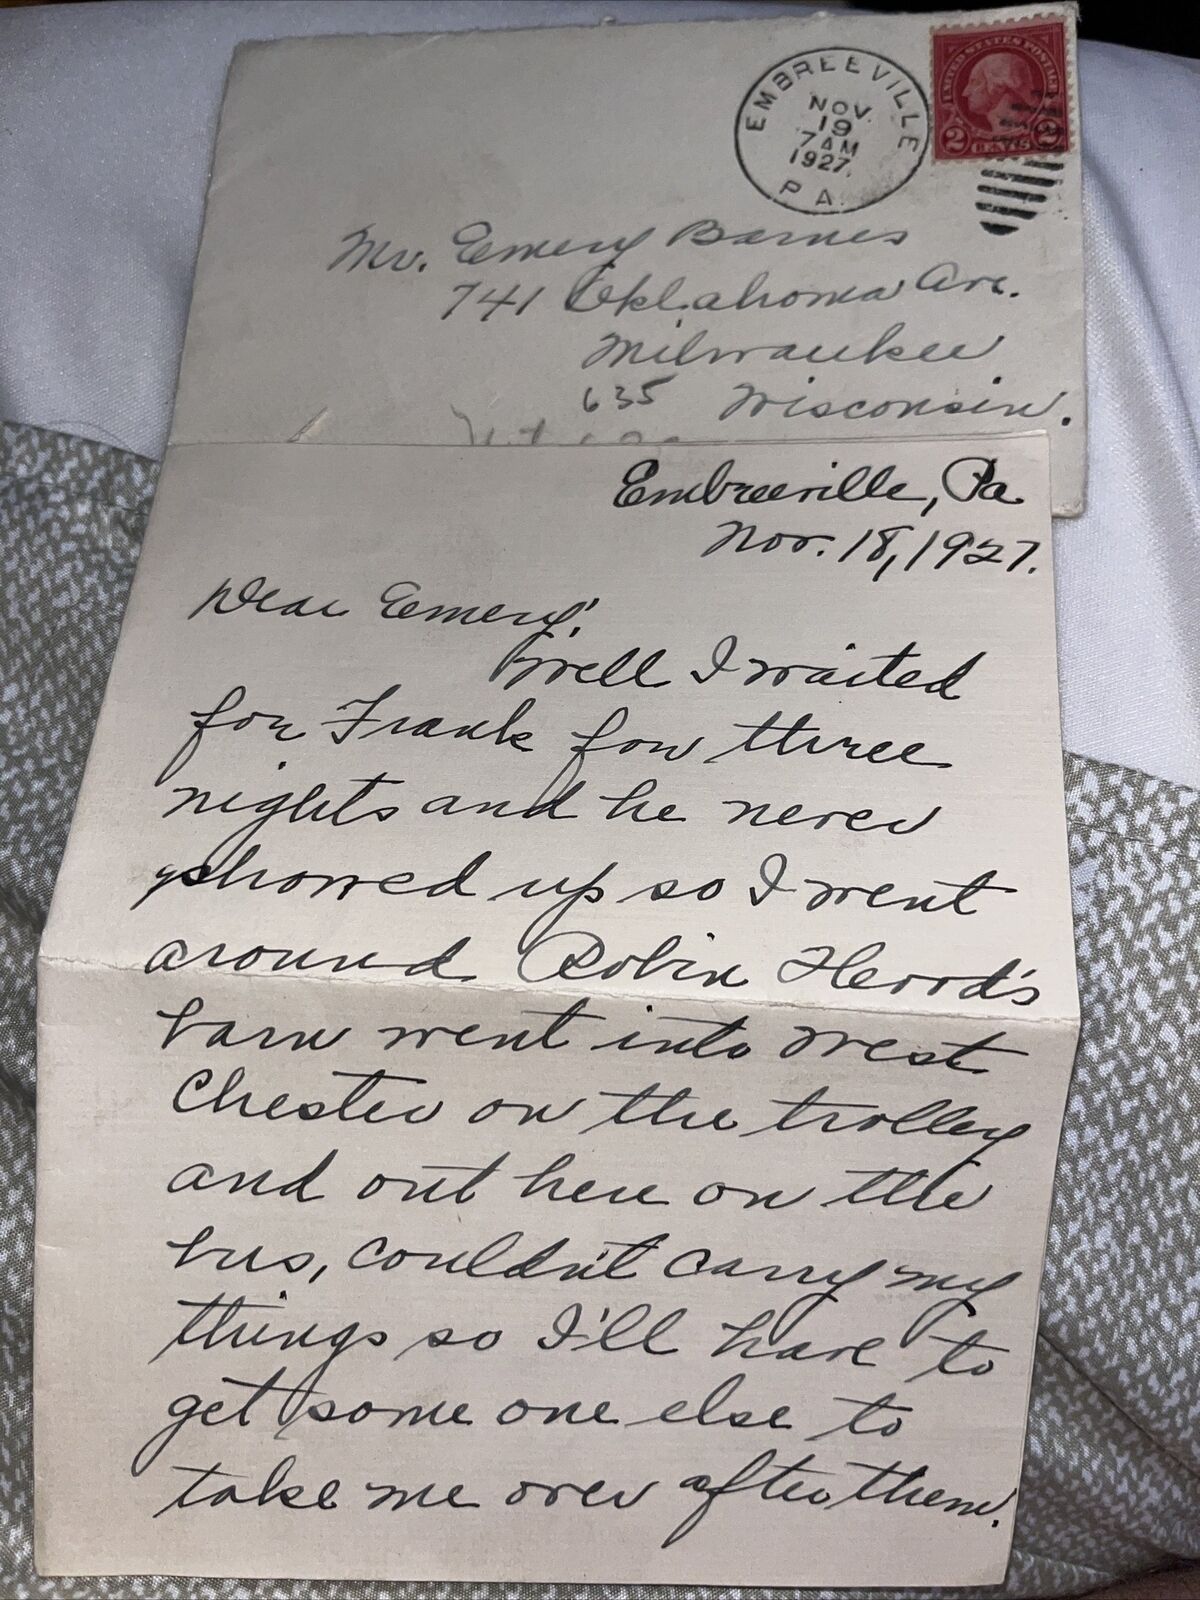 Antique 1927 Letter from Embreeville PA Mentions Trolley into West Chester